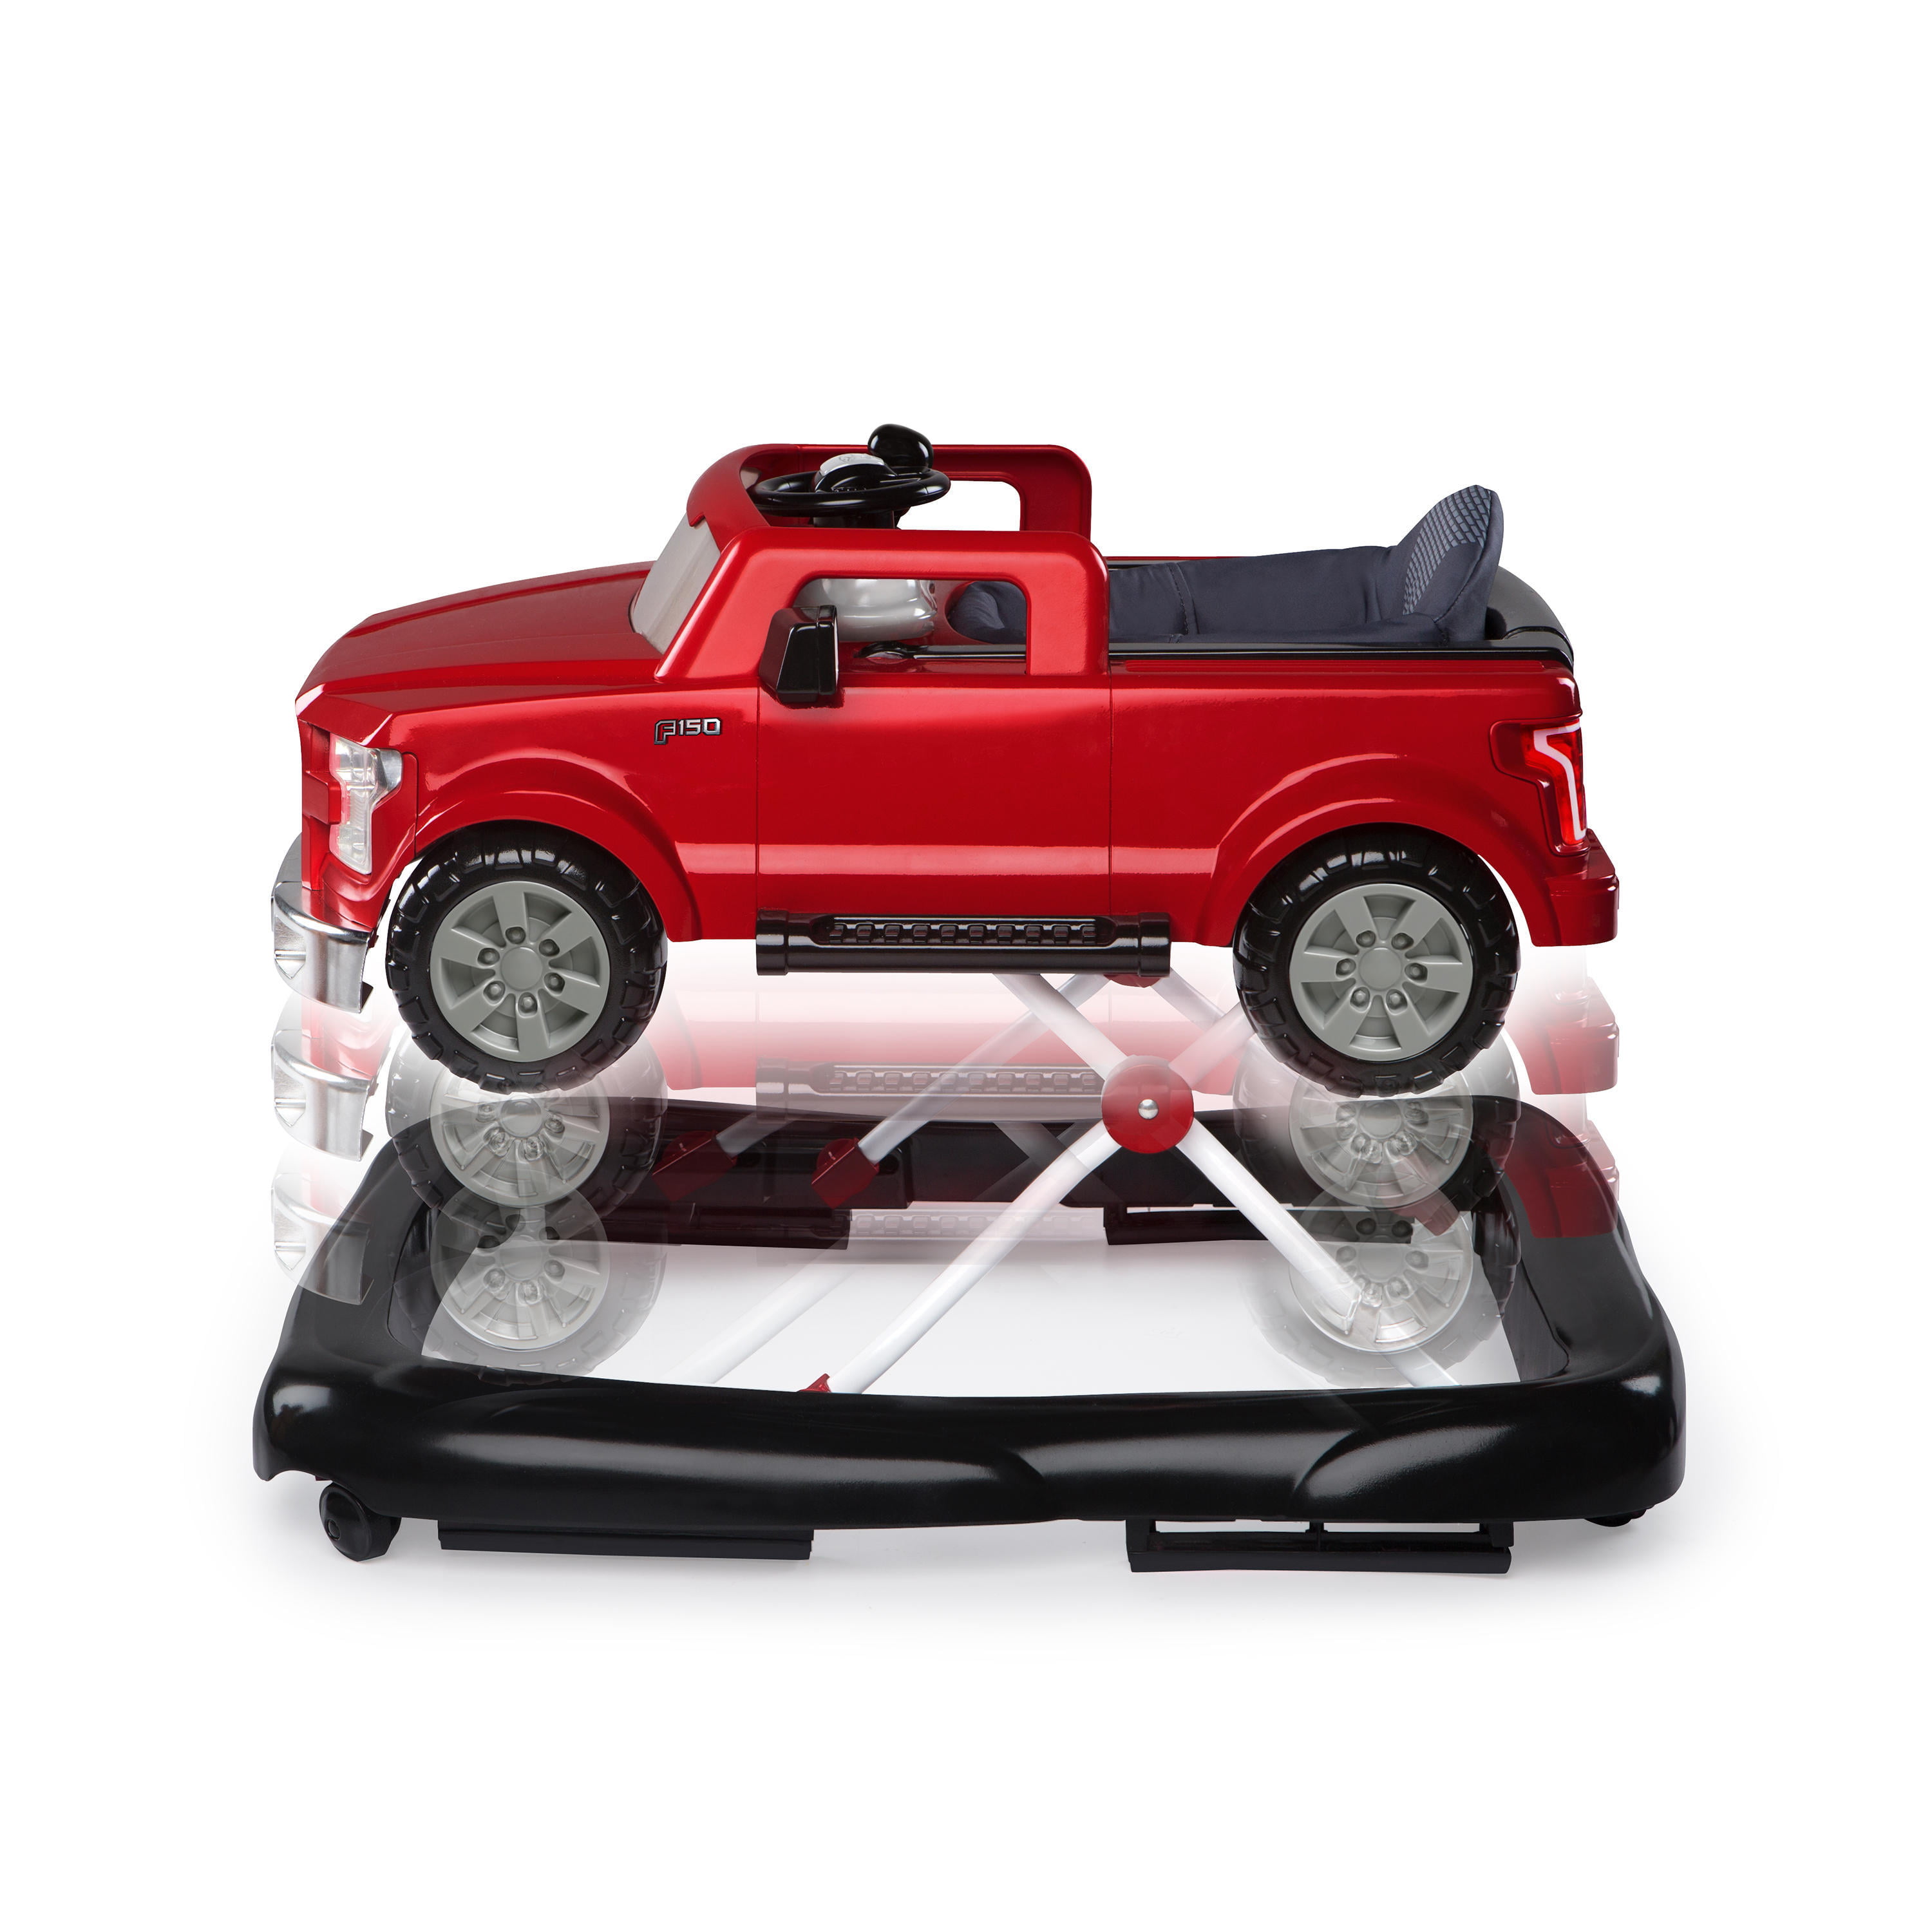 ford f150 baby walker